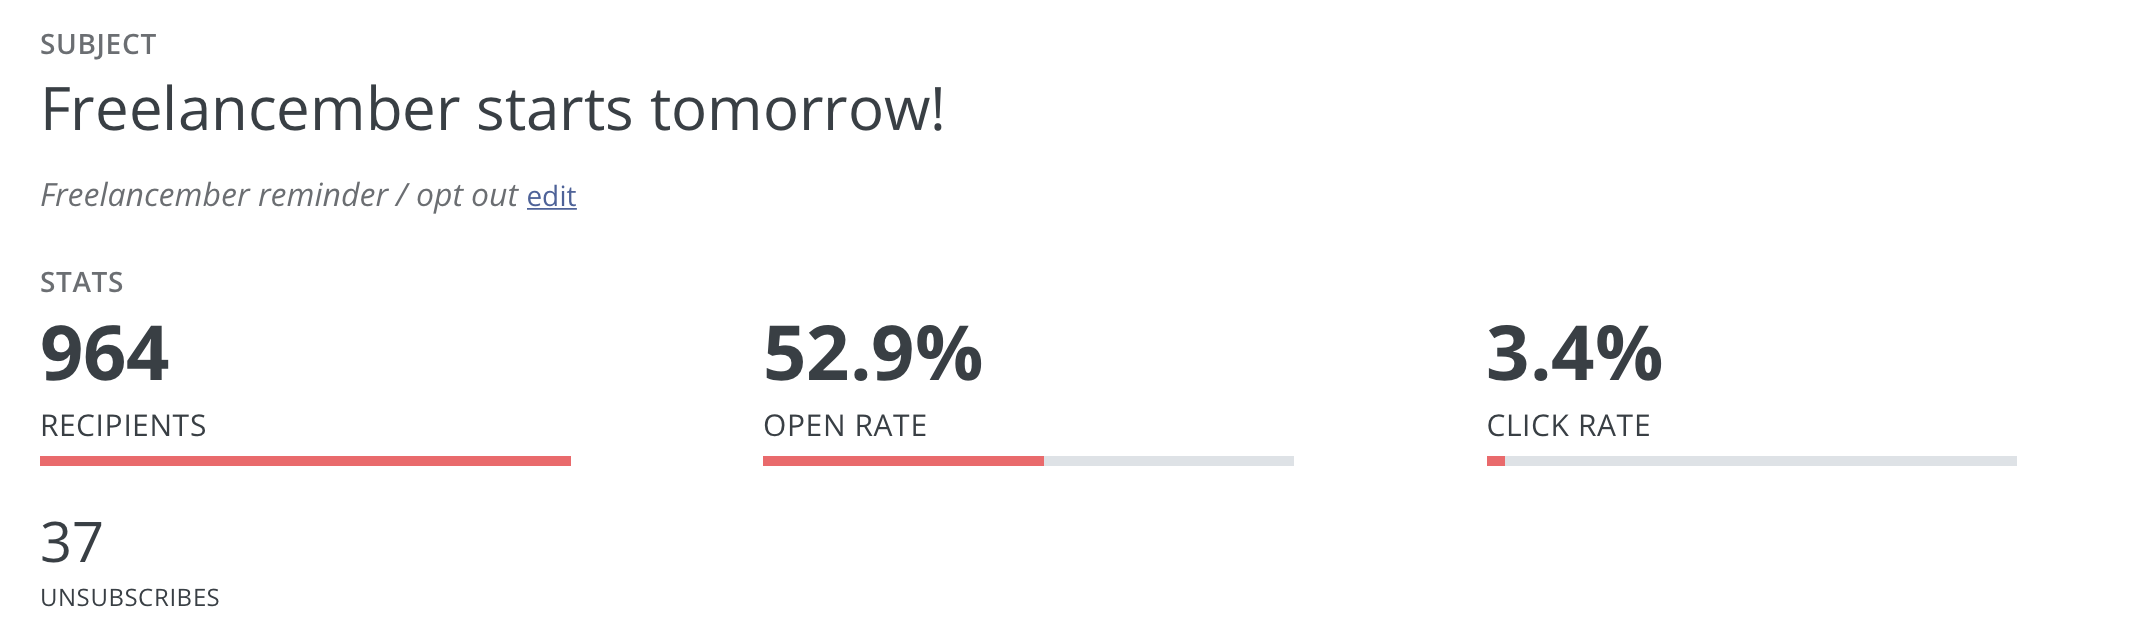 Screenshot of Convertkit stats for an email titled "Freelancember starts tomorrow!" 964 recipients, 52.9% open rate, 3.4% click rate, 37 unsubscribes